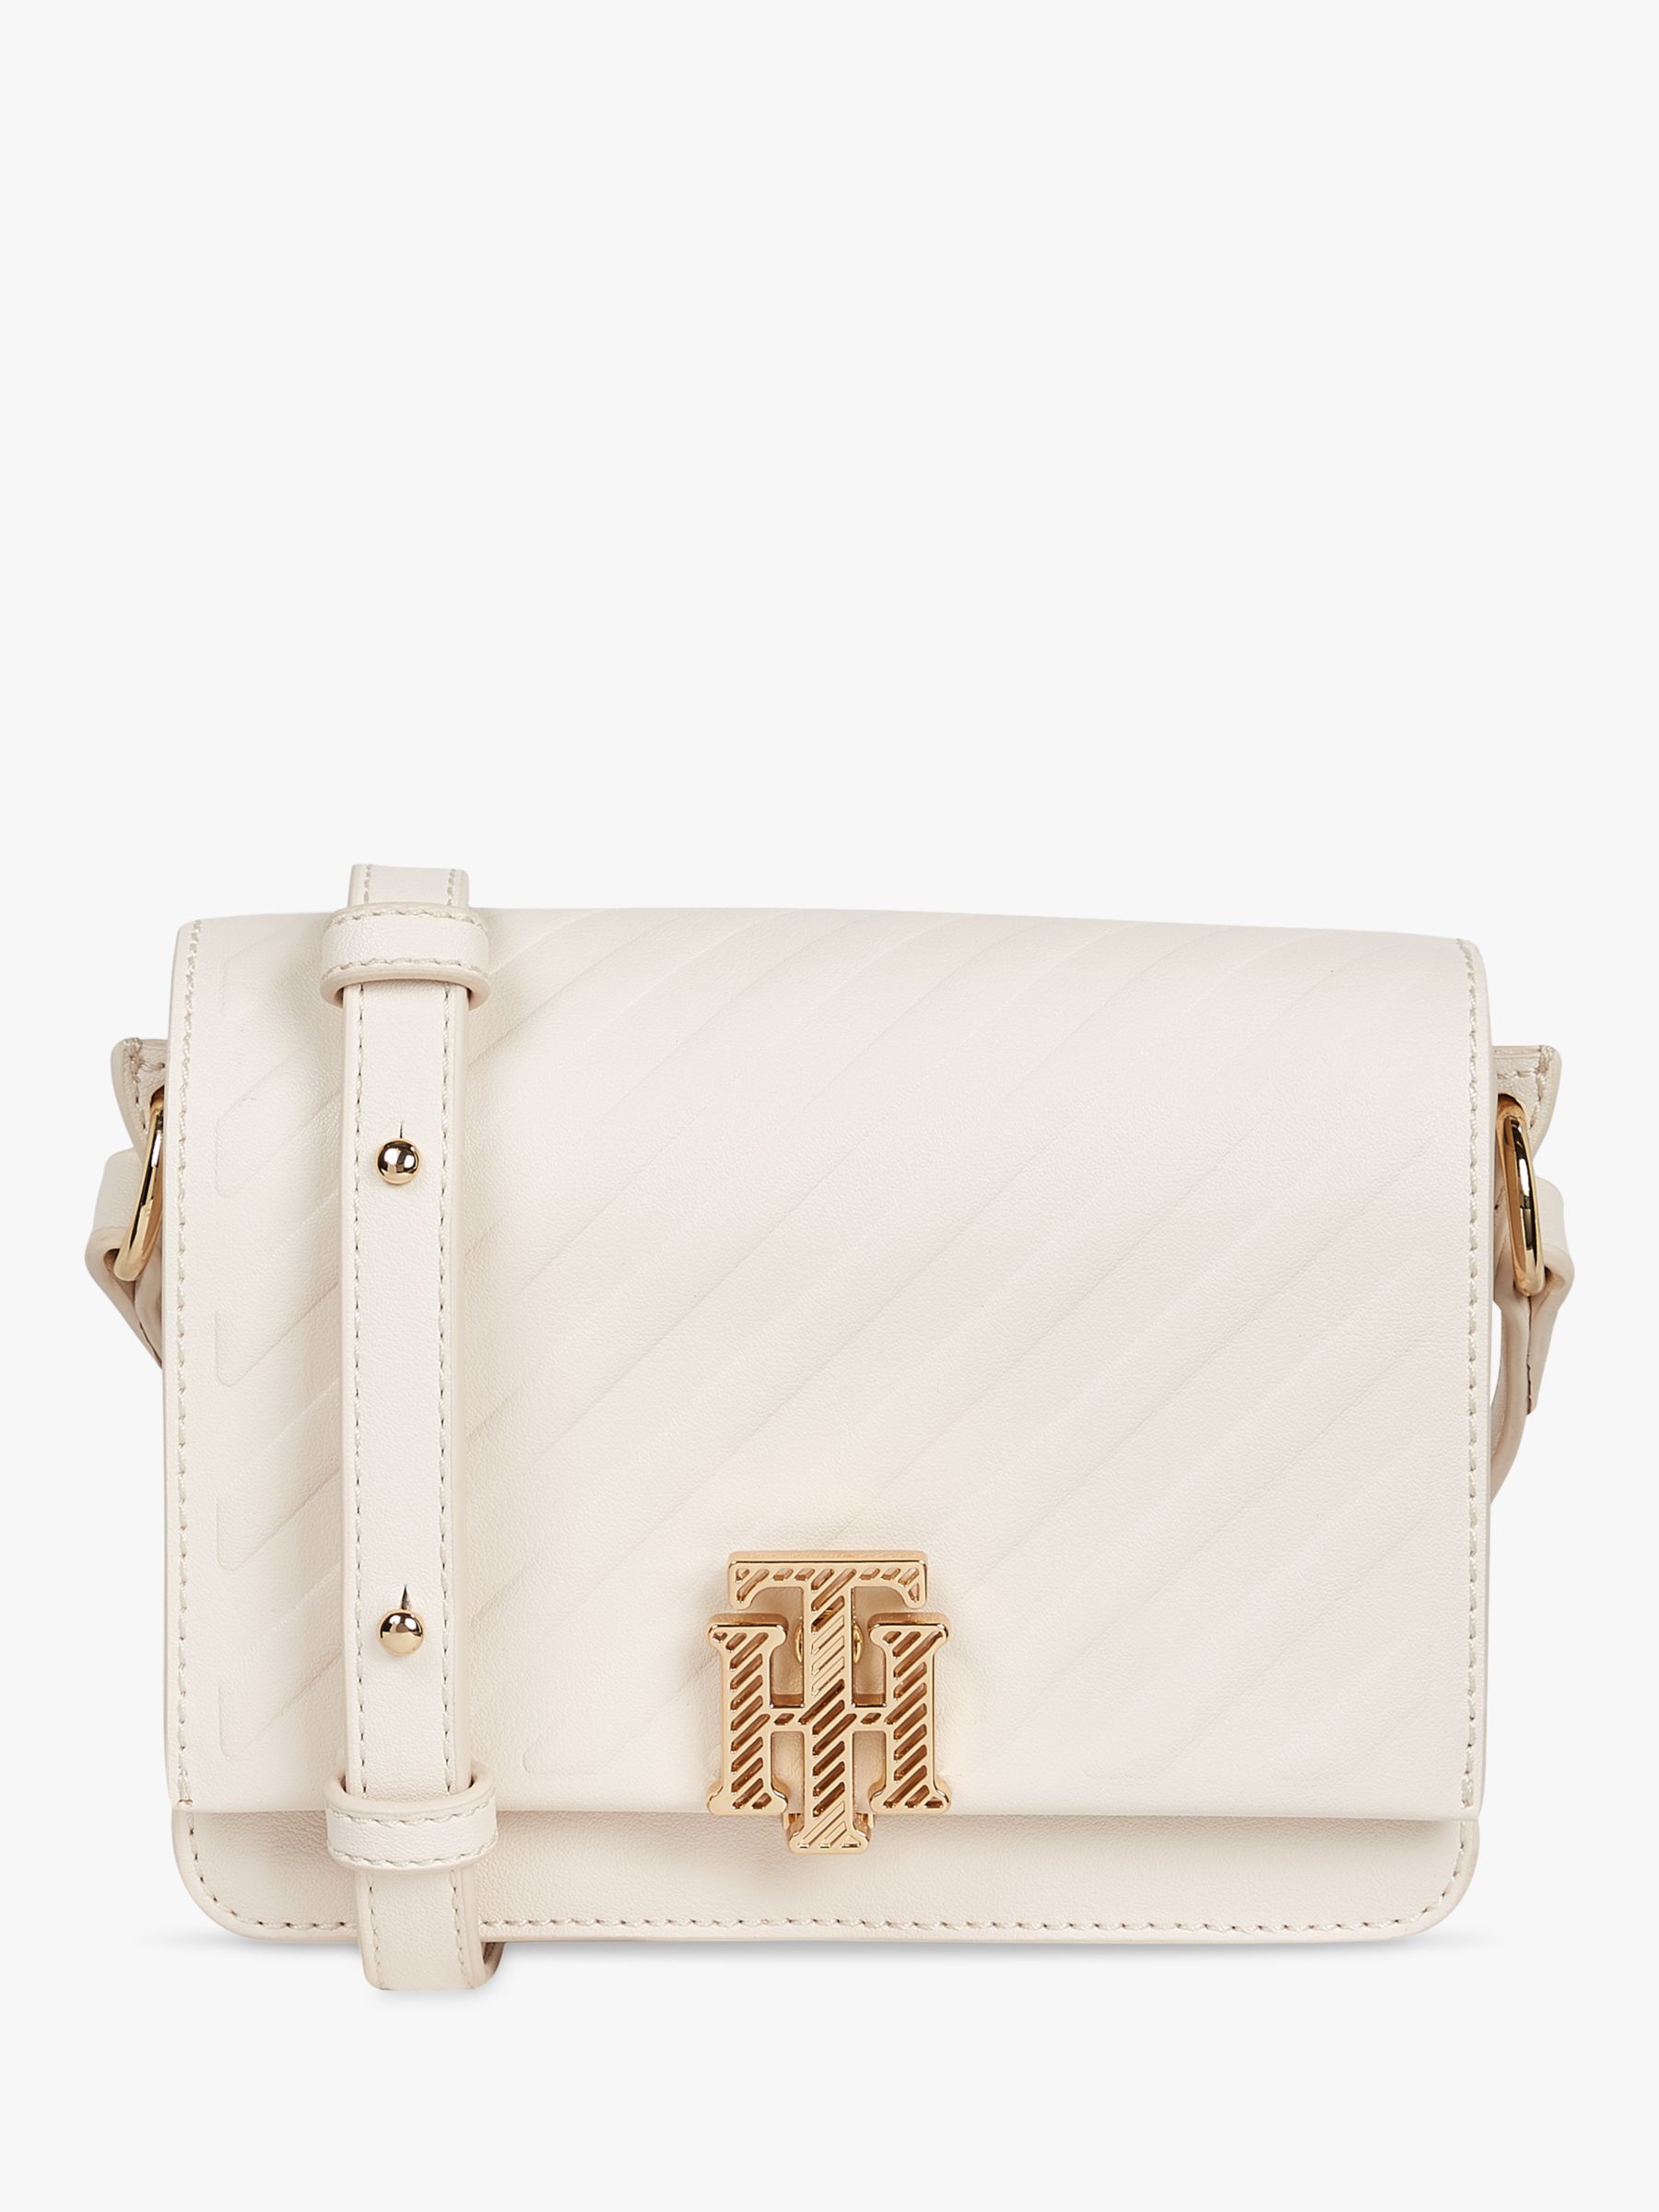 Tommy Hilfiger Monogram Cross Body Bag, Feather White at John Lewis ...